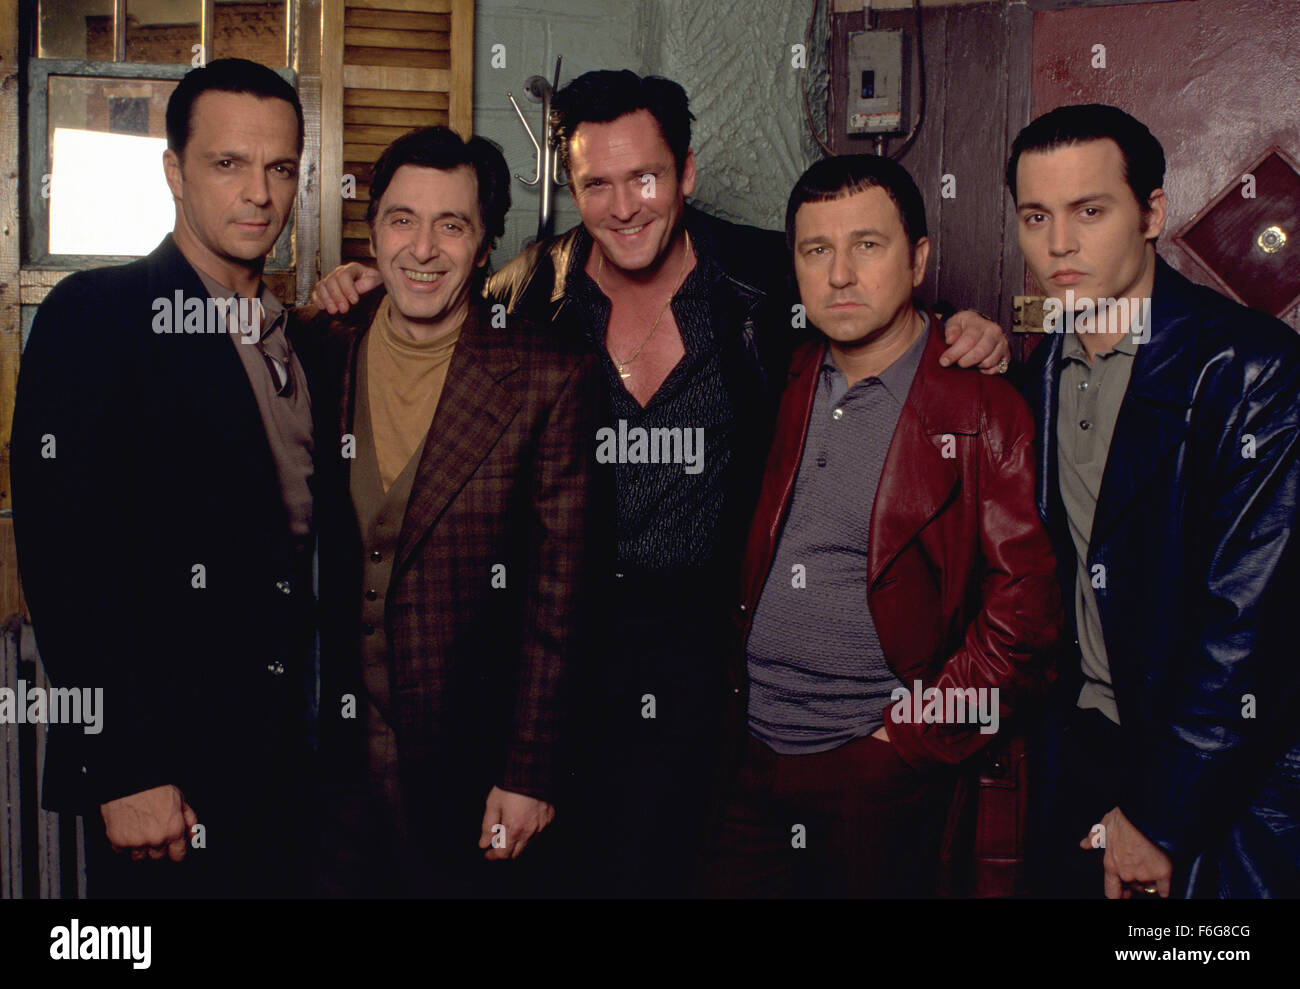 On the set of 'Donnie Brasco' (L-R): JAMES RUSSO, AL PACINO, MICHAEL MADSEN, BRUNO KIRBY and JOHNNY DEPP. Stock Photo